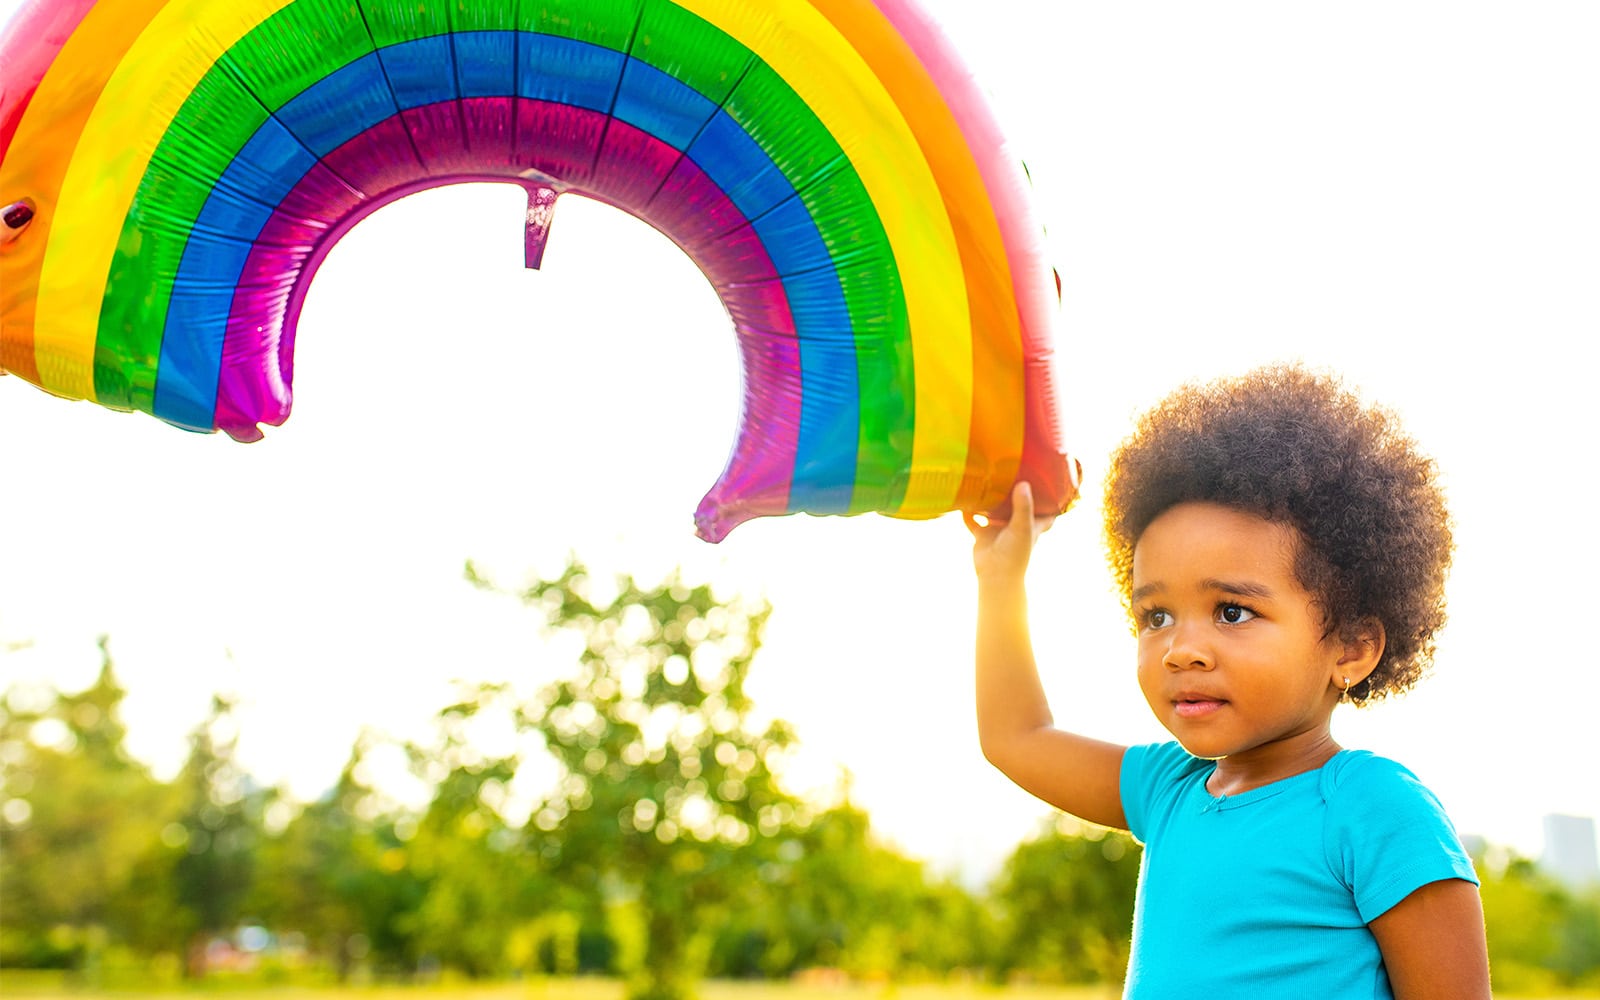 Image of a little girl holding a rainbow balloon